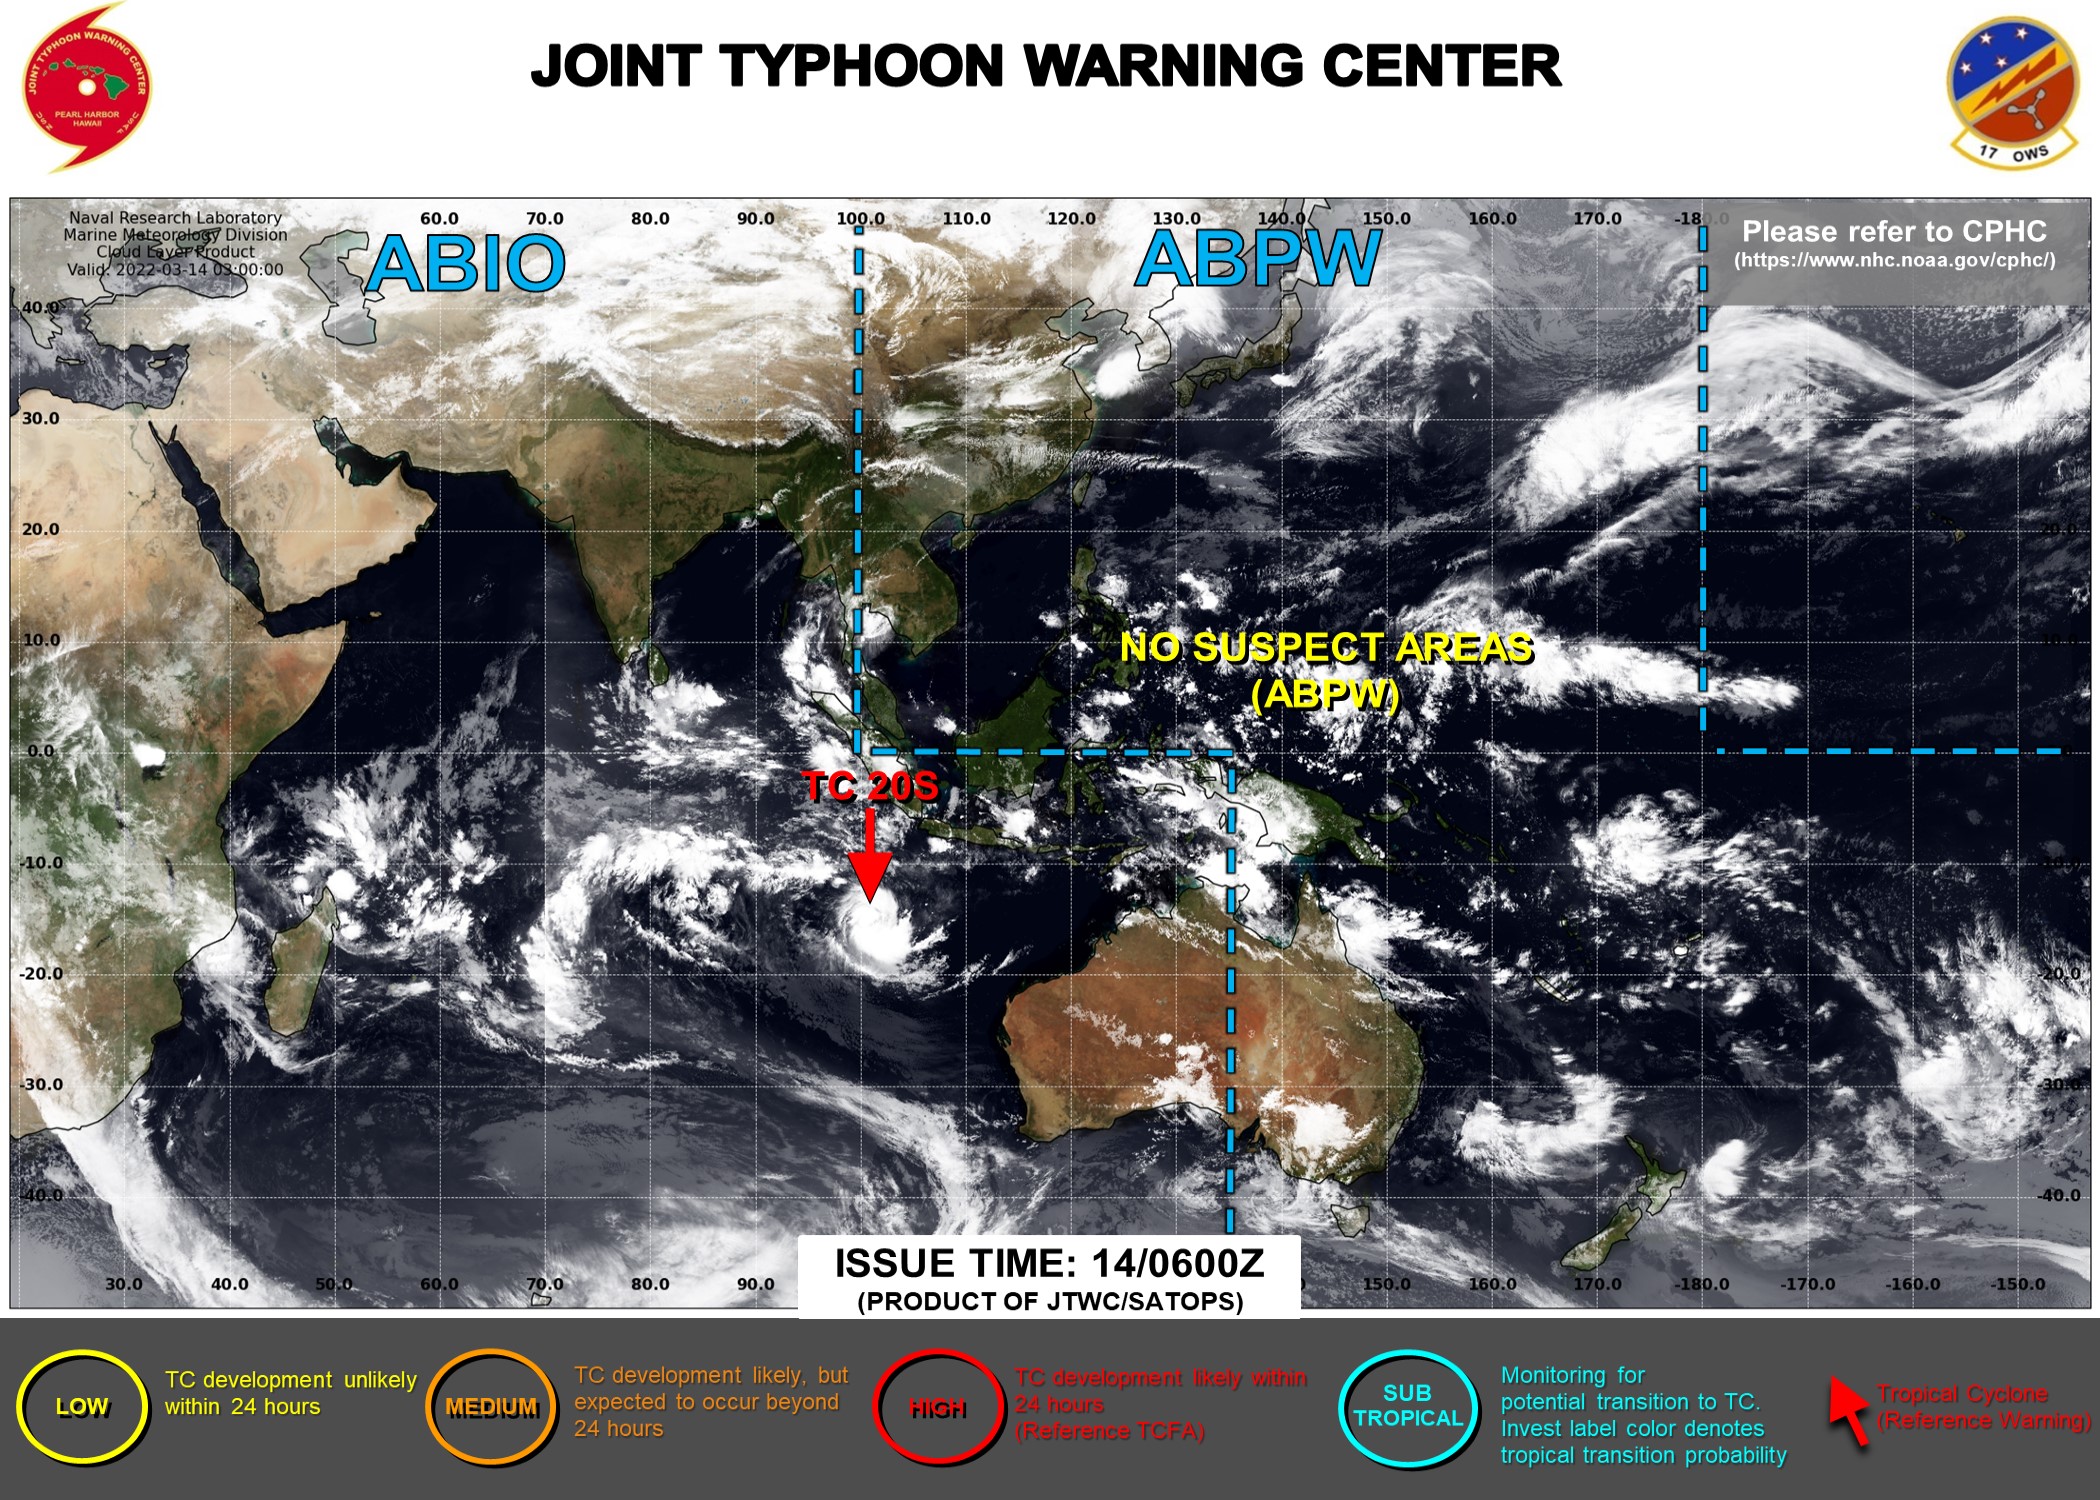 JTWC IS ISSUING 12HOURLY WARNING AND 3HOURLY SATELLITE BULLETINS ON TC 20S.